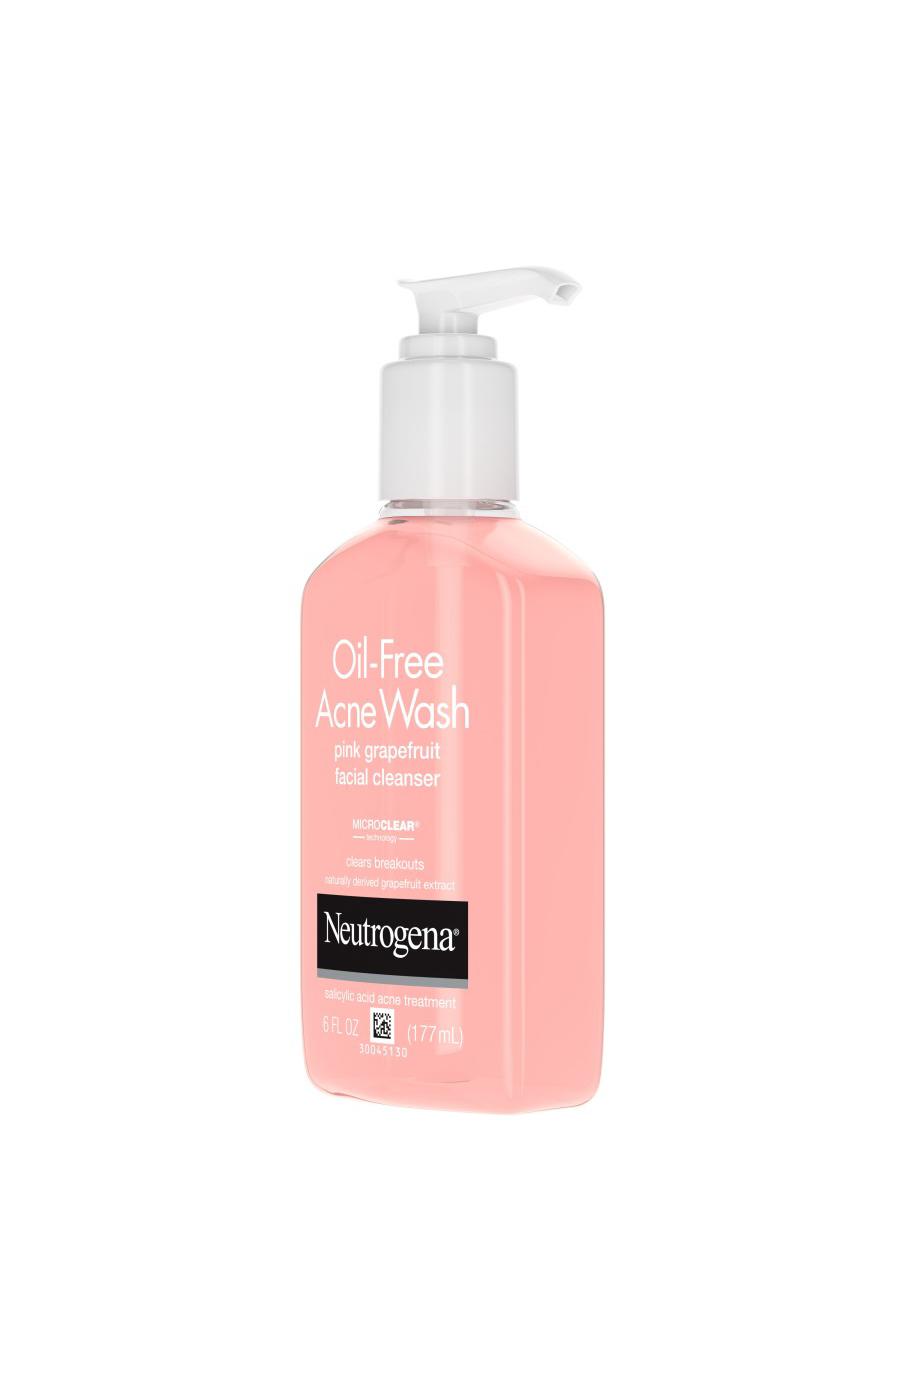 Neutrogena Oil-Free Acne Wash Pink Grapefruit Facial Cleanser; image 2 of 8